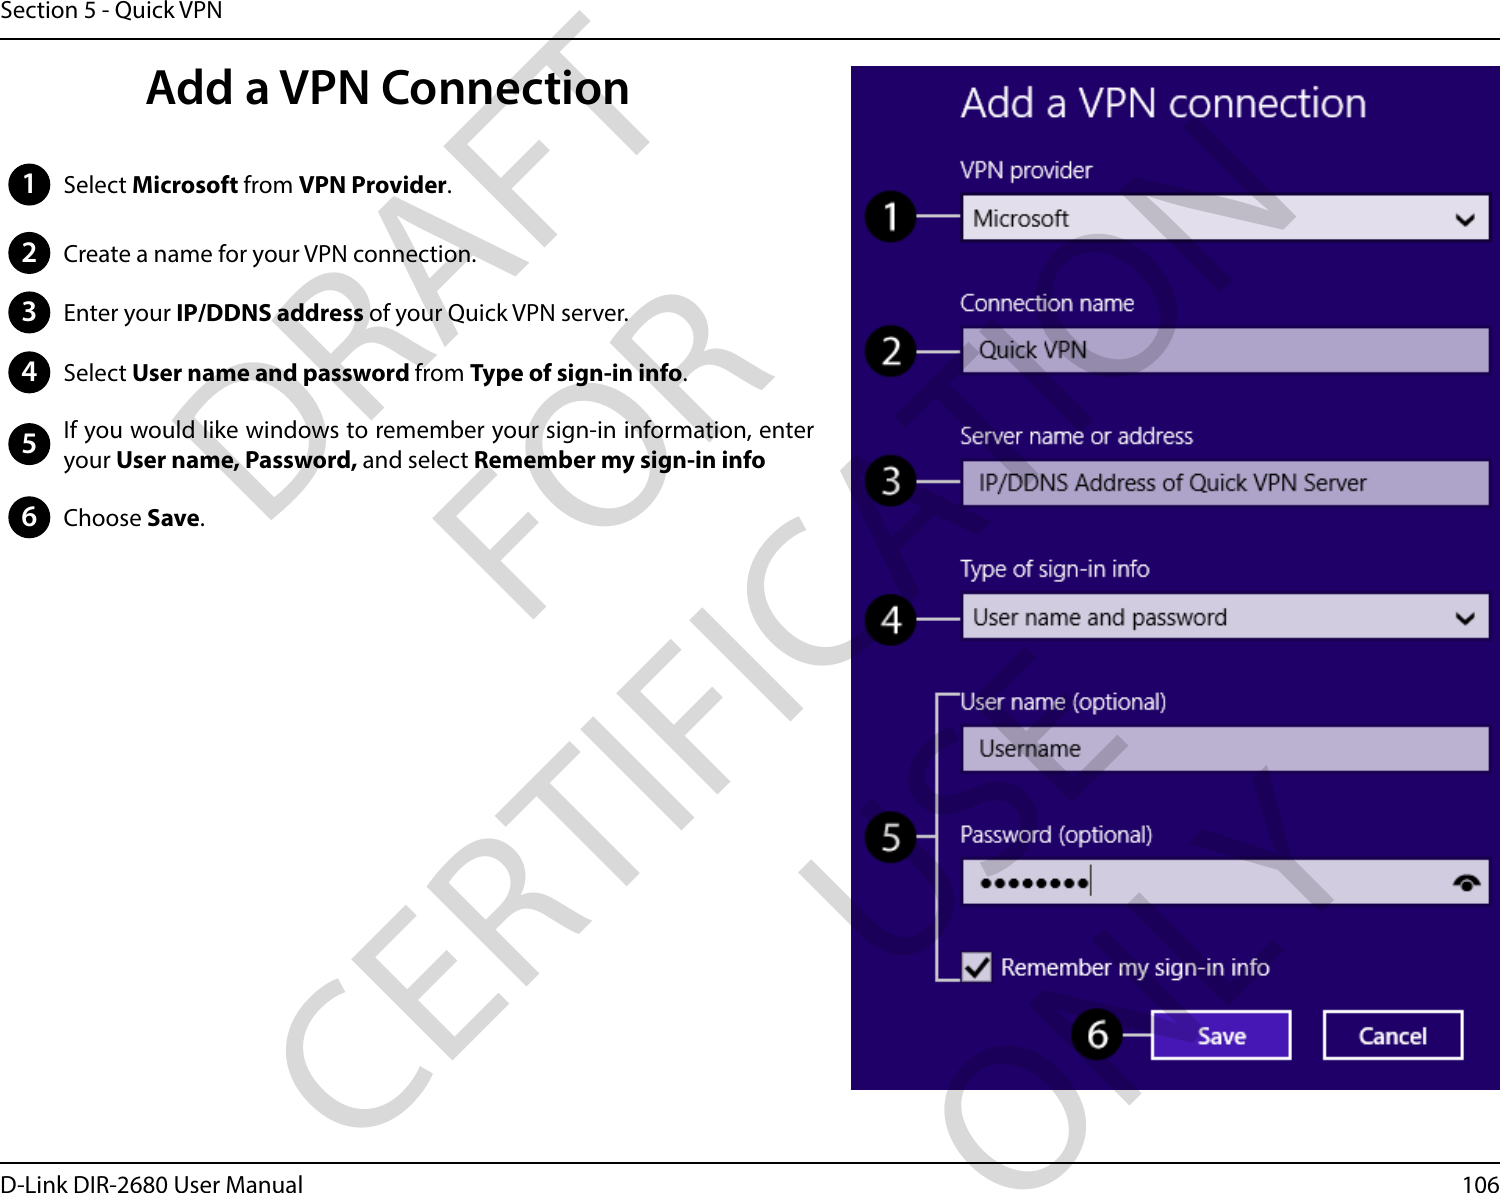 106D-Link DIR-2680 User ManualSection 5 - Quick VPN1Select Microsoft from VPN Provider.2Create a name for your VPN connection.3Enter your IP/DDNS address of your Quick VPN server.4Select User name and password from Type of sign-in info.5If you would like windows to remember your sign-in information, enter your User name, Password, and select Remember my sign-in info6Choose Save.Add a VPN ConnectionDRAFT FOR CERTIFICATION USE ONLY